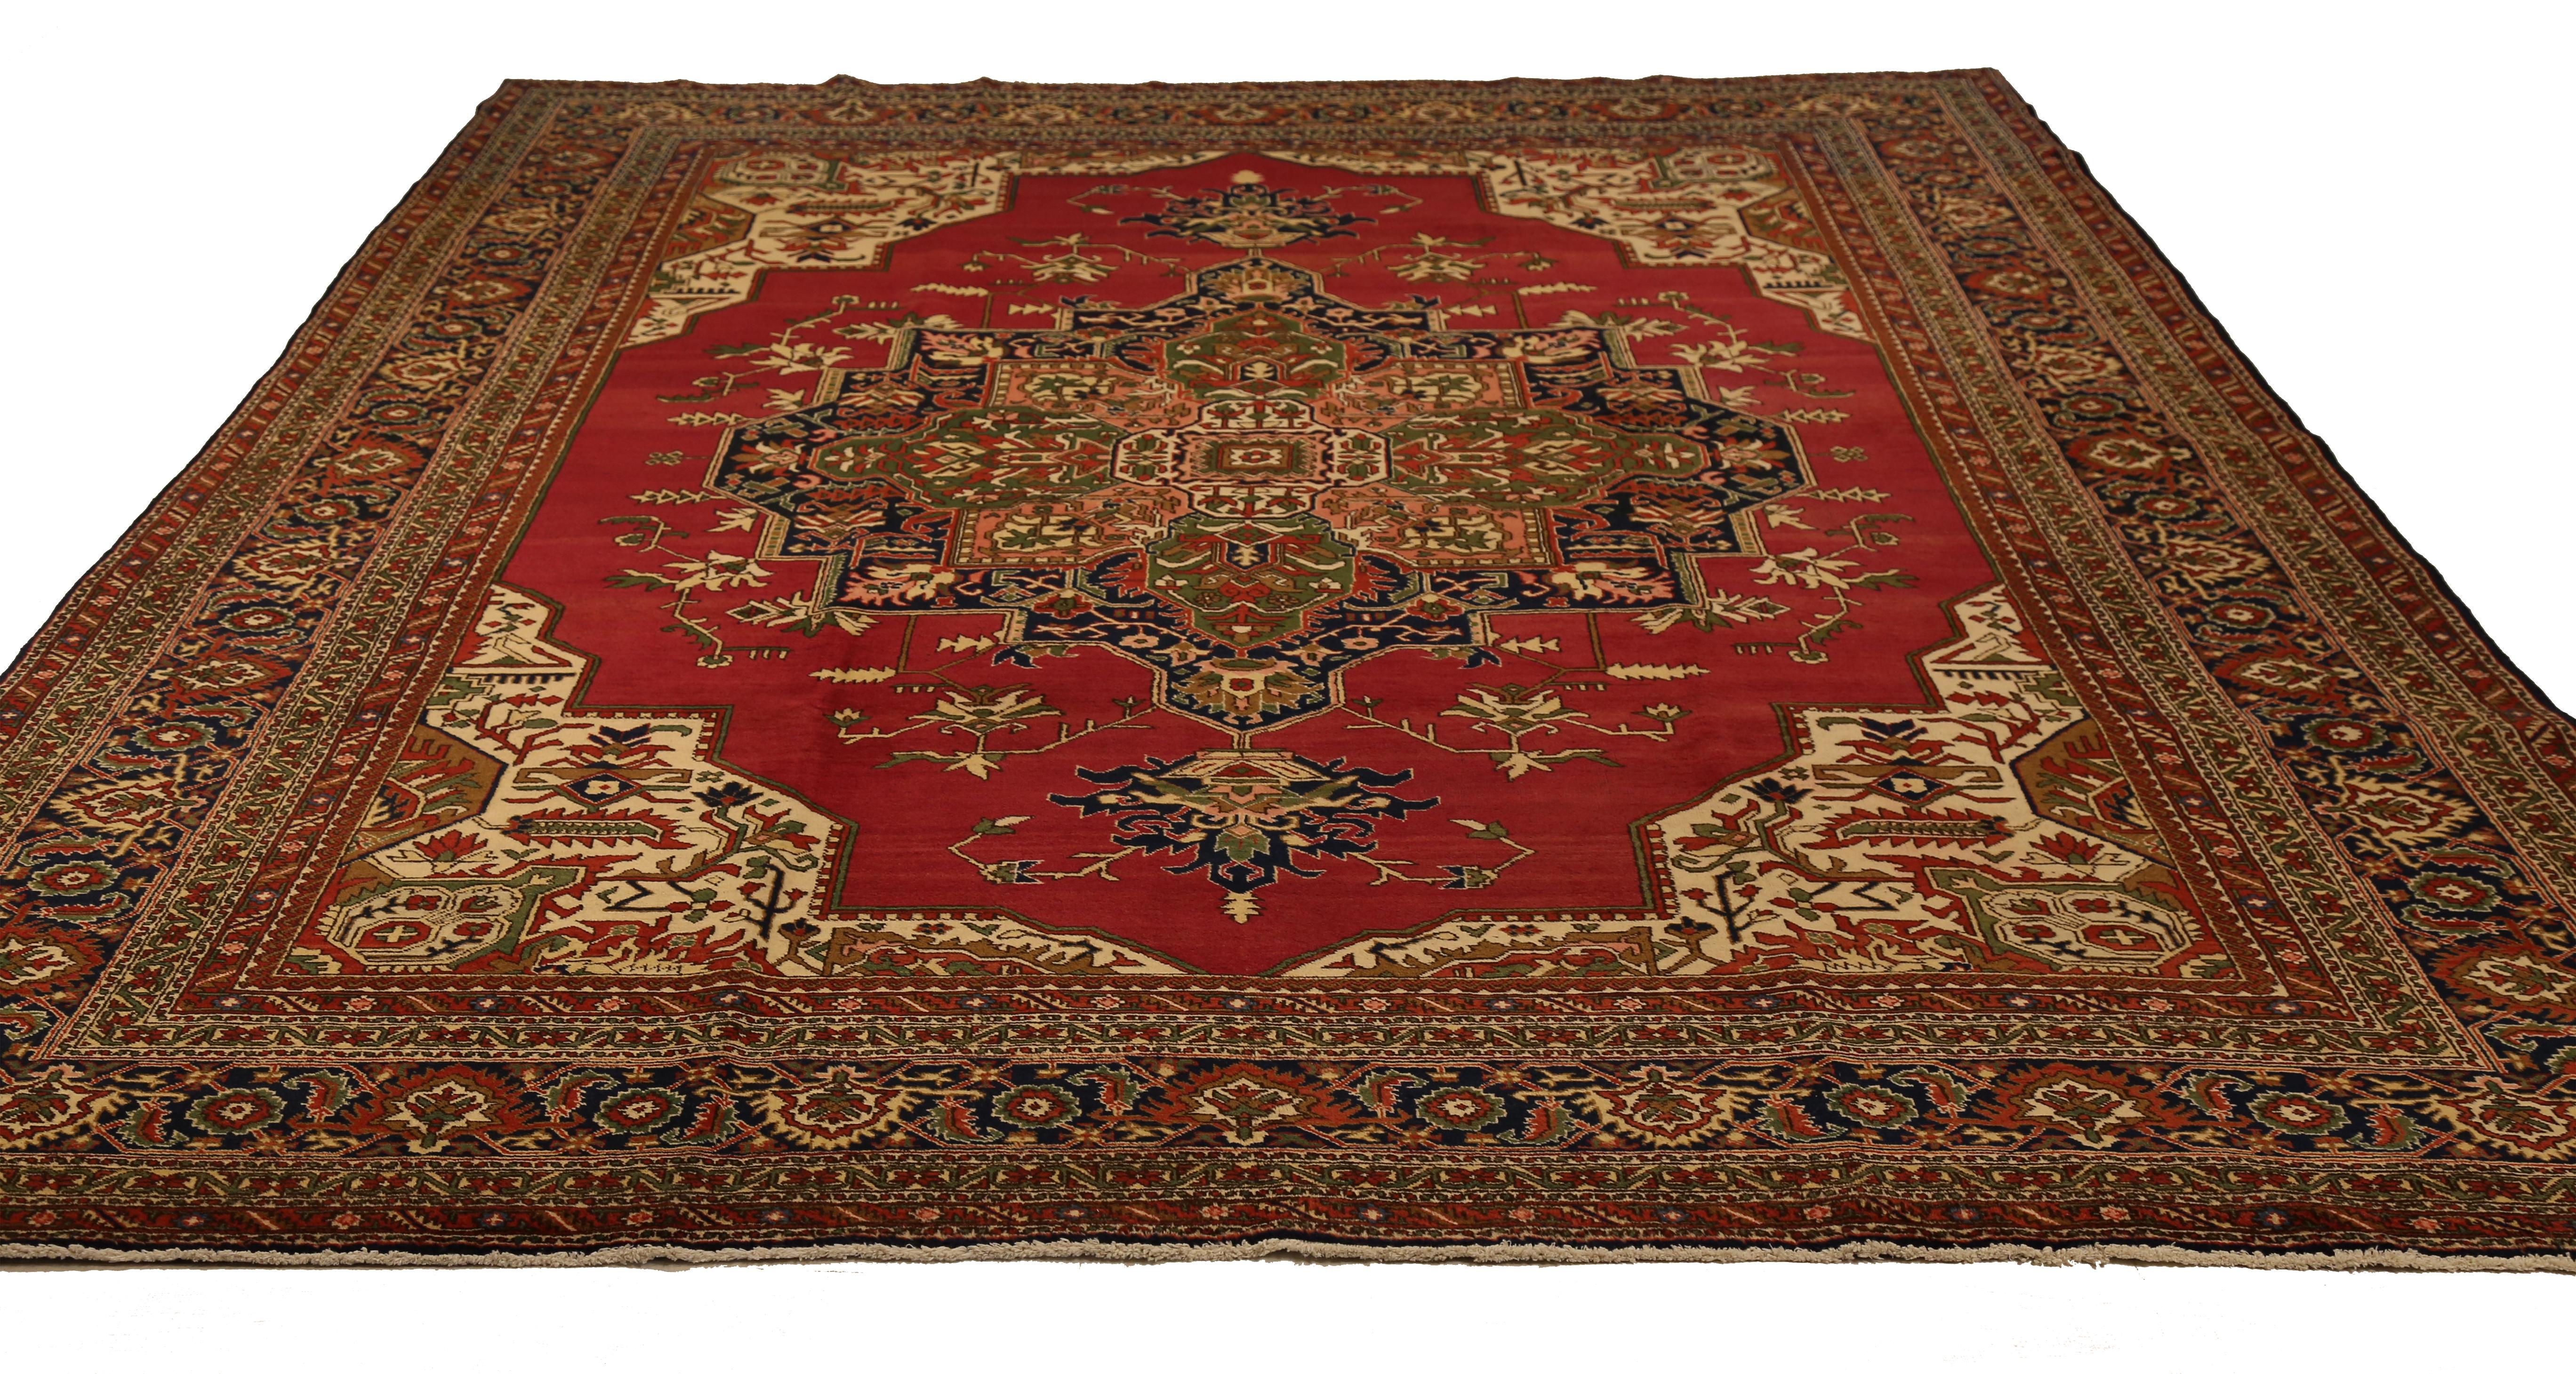 Hand knotted Persian accent rug made from fine wool and all-natural vegetable dyes that are safe for people and pets. This beautiful piece features ornate floral patterns in various colors which Tabriz rugs are known for. Persian rugs are highly